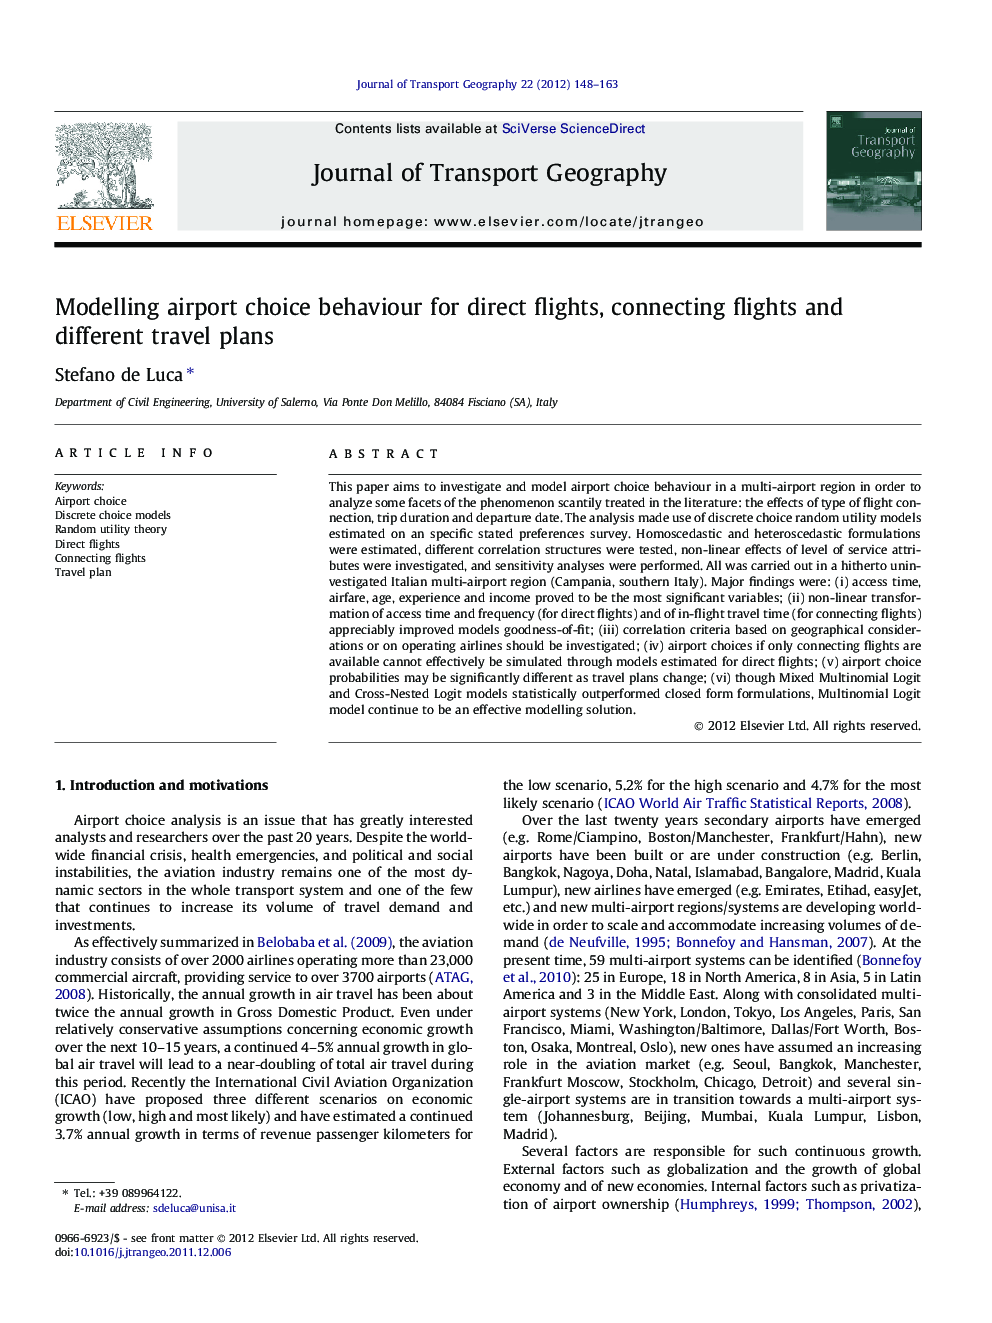 Modelling airport choice behaviour for direct flights, connecting flights and different travel plans